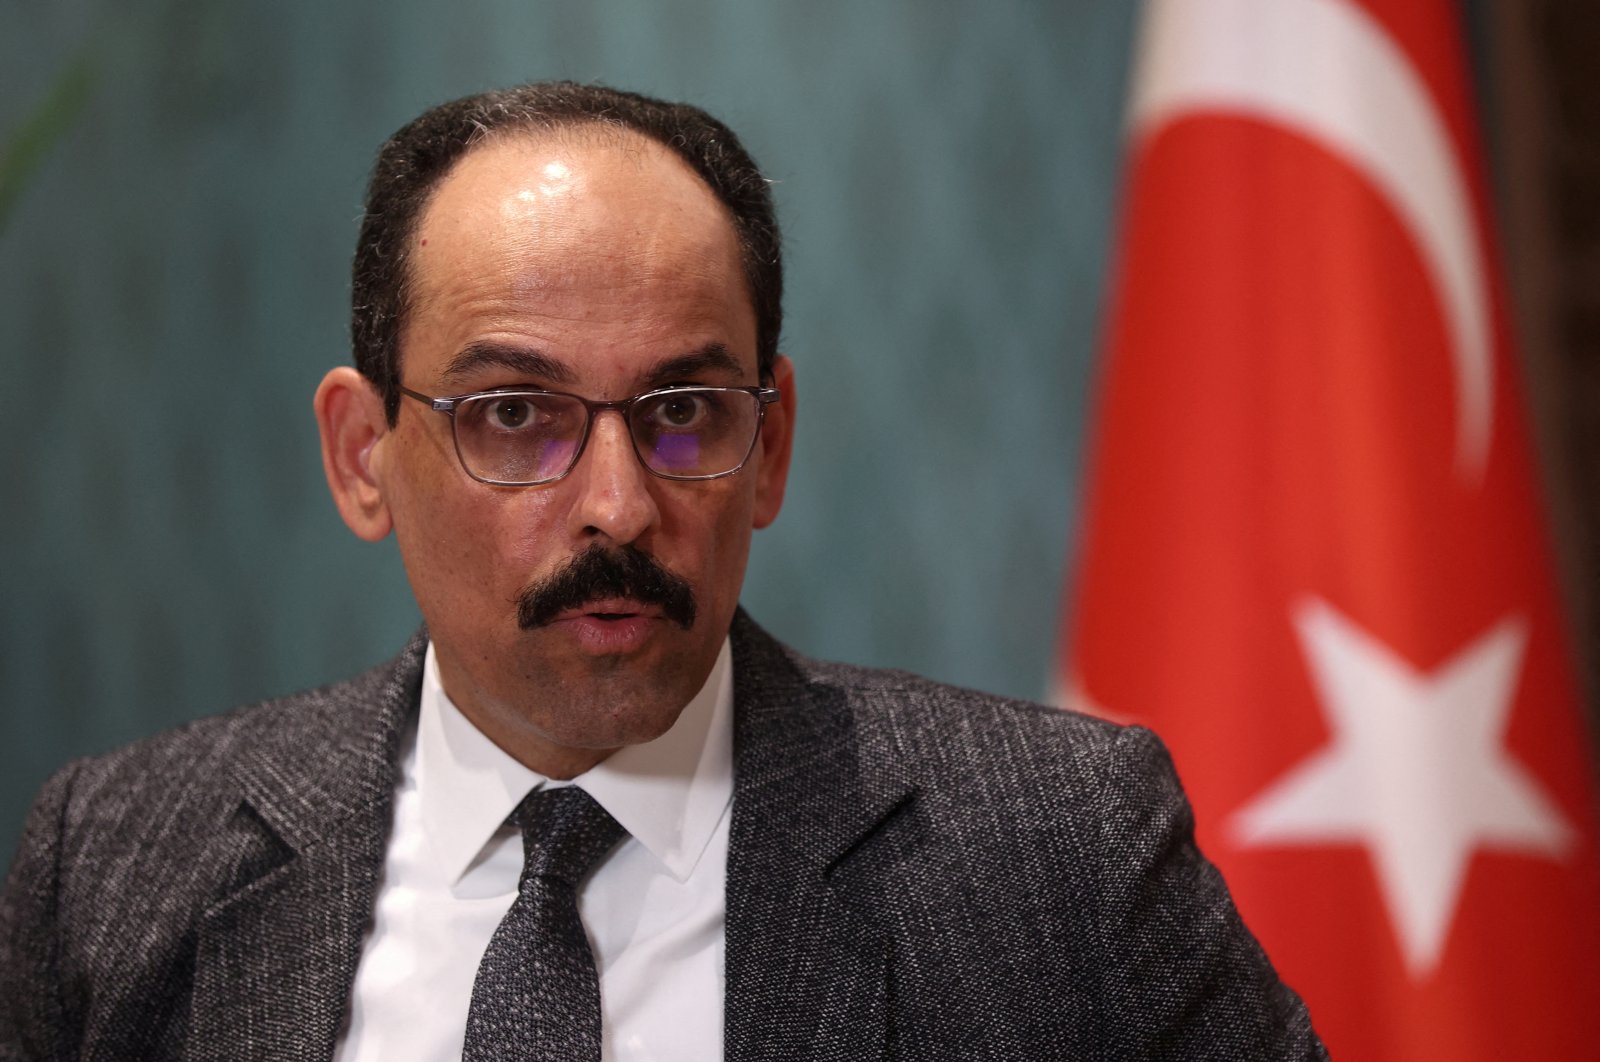 Ibrahim Kalın, presidential spokesperson and chief foreign policy adviser, speaks during an interview with Reuters in Istanbul, Turkey May 14, 2022. Picture taken May 14, 2022. REUTERS/Murad Sezer/File Photo